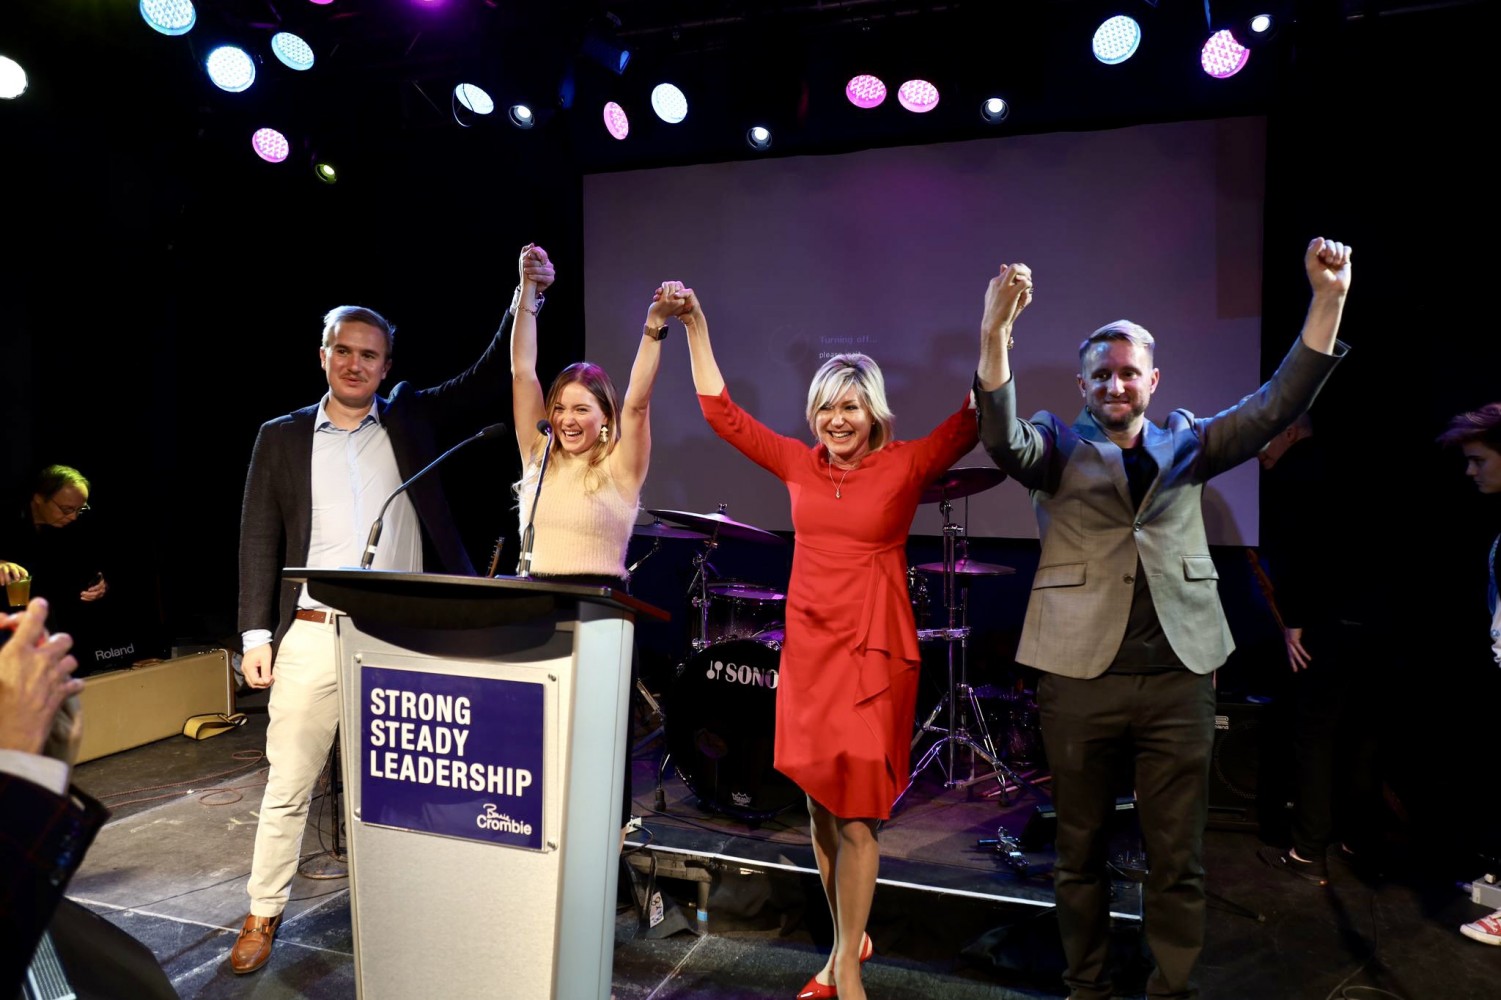 Mississauga Mayor Bonnie Crombie reelected with overwhelming majority; Ron Starr easily defeated by Joe Horneck